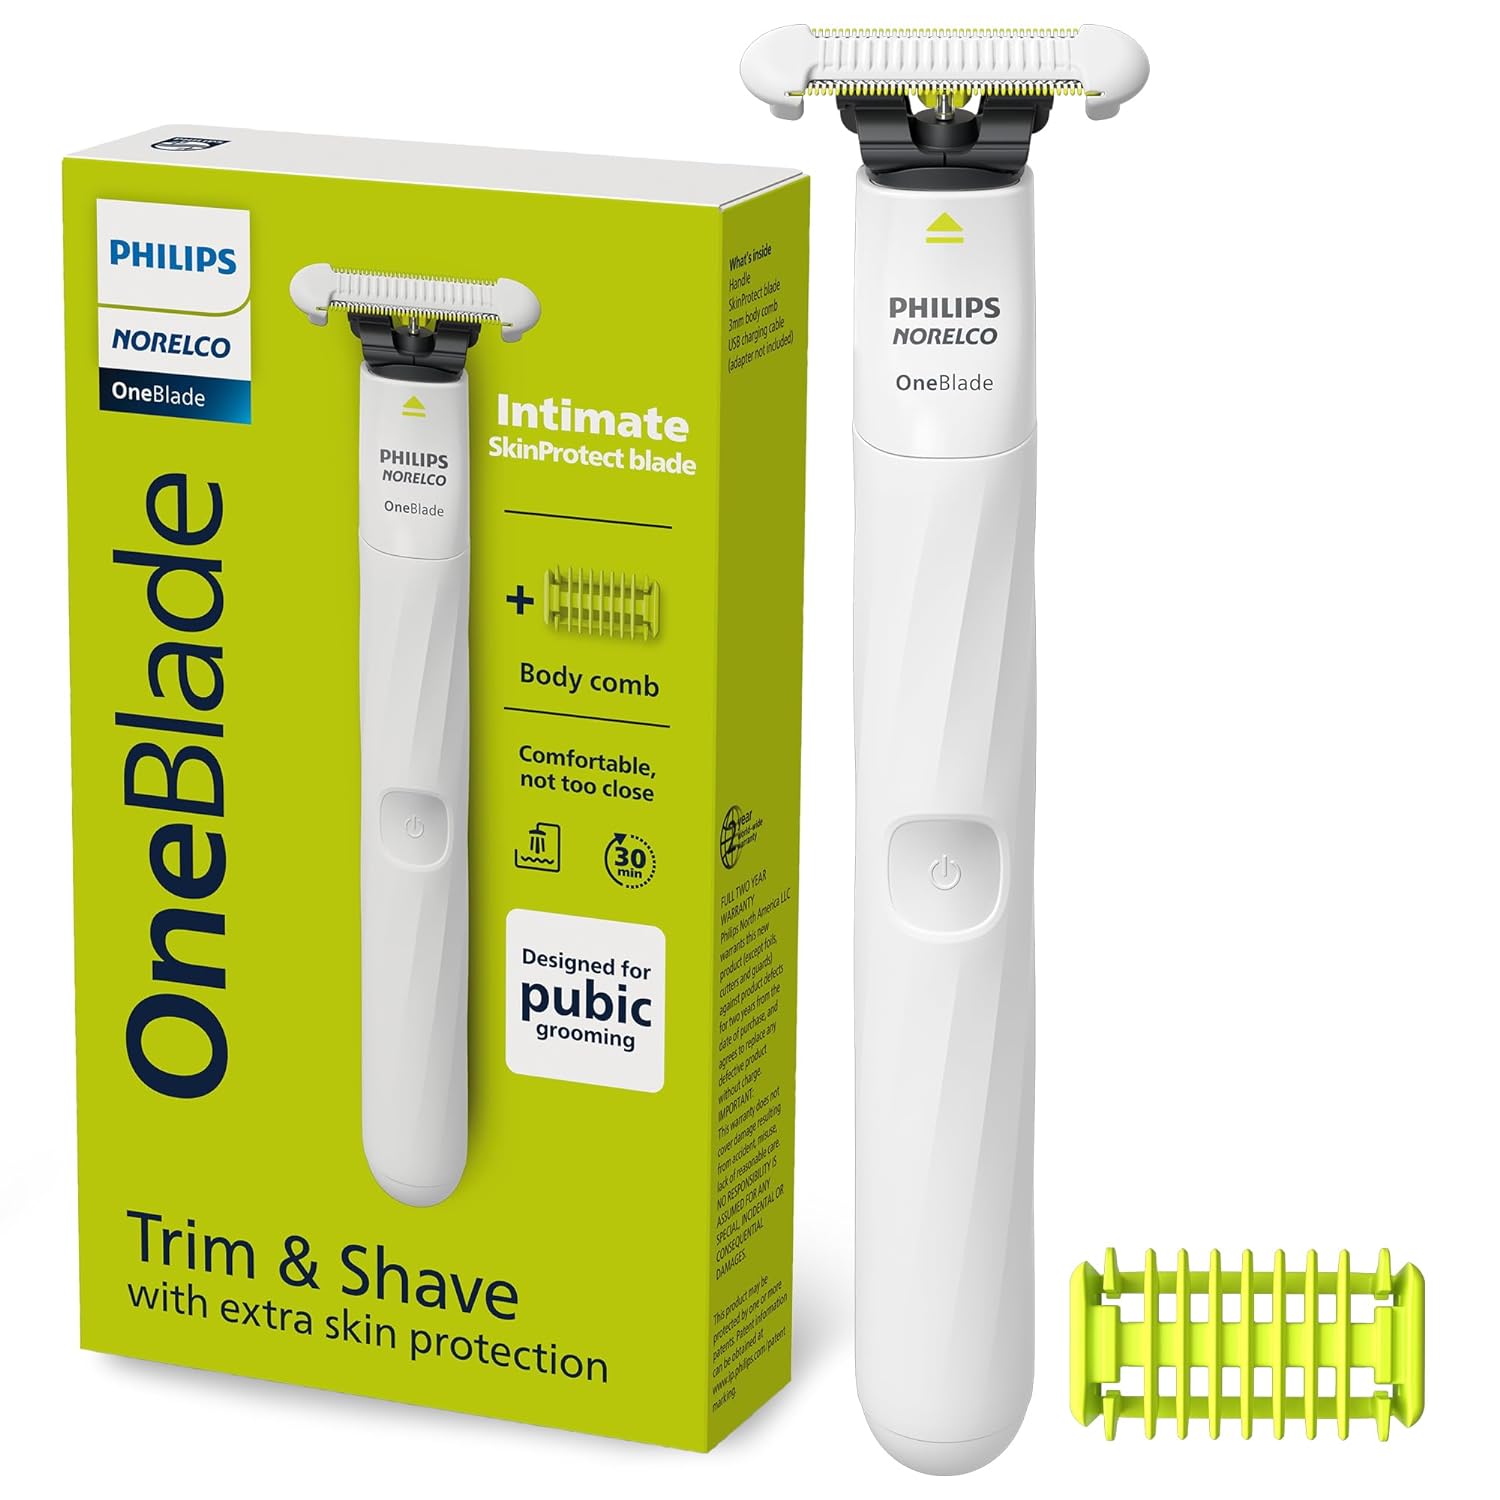 Philips Norelco OneBlade Unisex Intimate Pubic & Personal Body Groomer